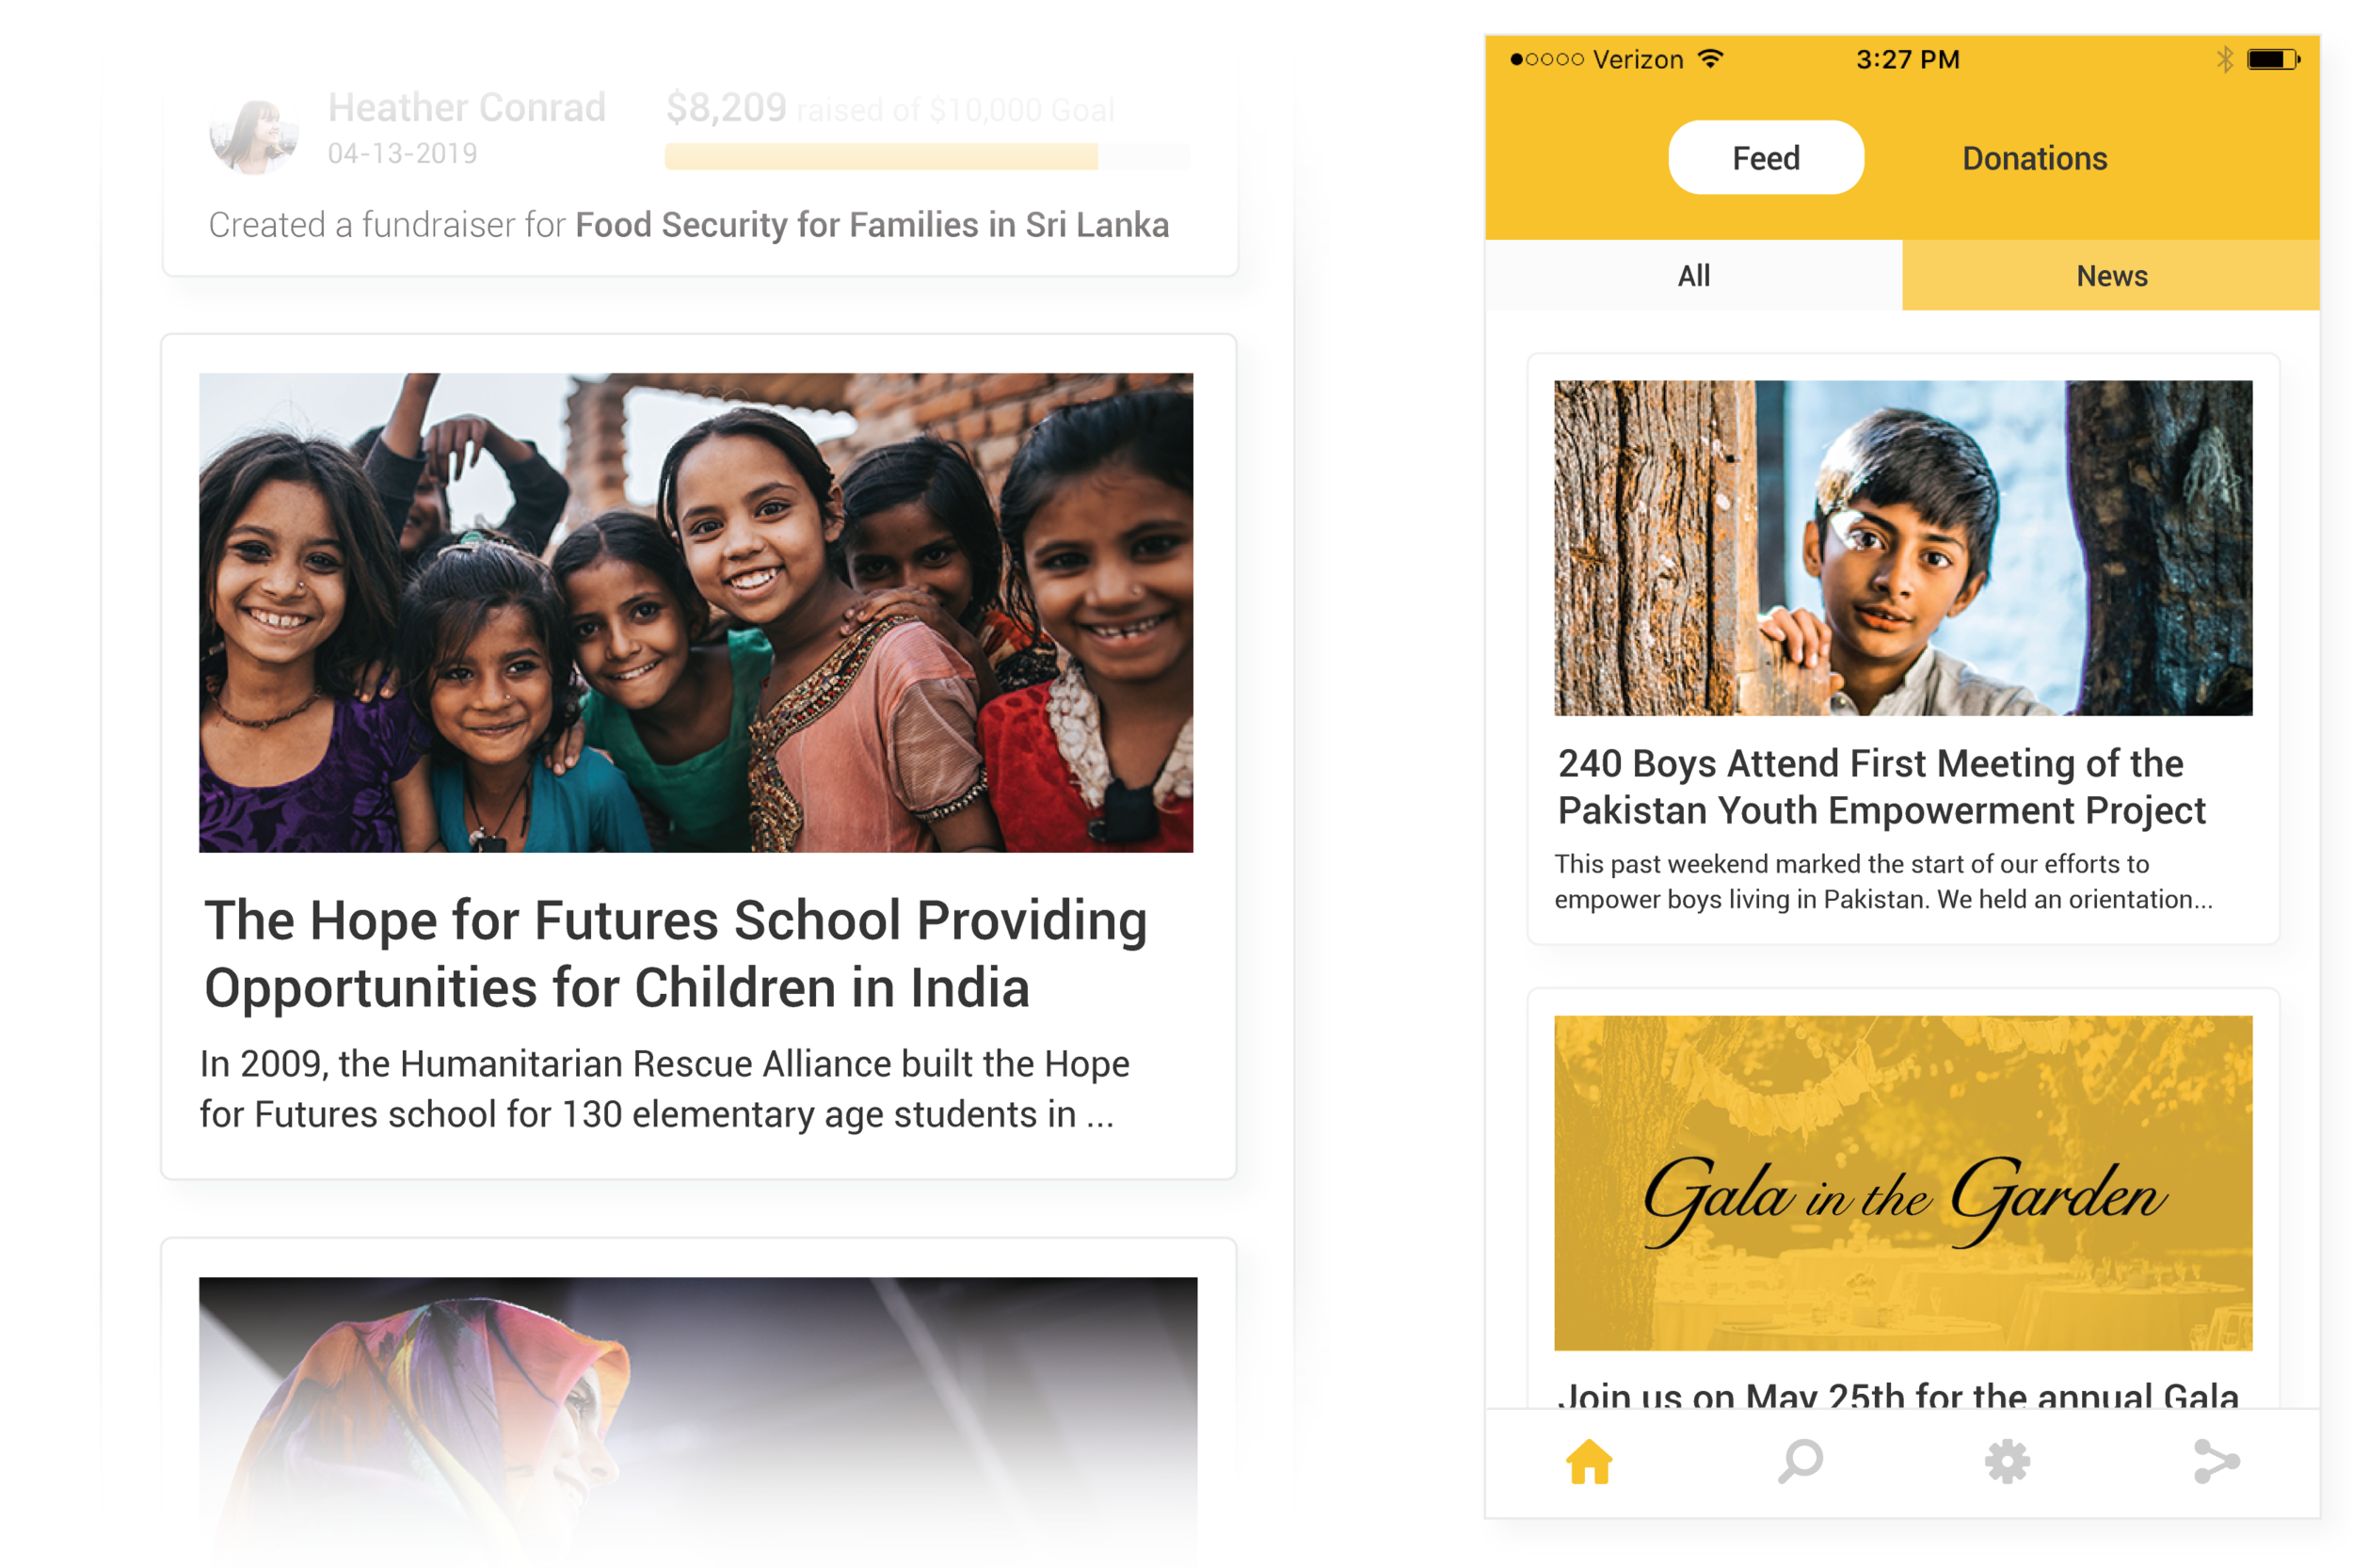 News worthy content - Keep supporters in the know with engaging content in the news feed of your app. Share events, campaign updates, impact stories and more.